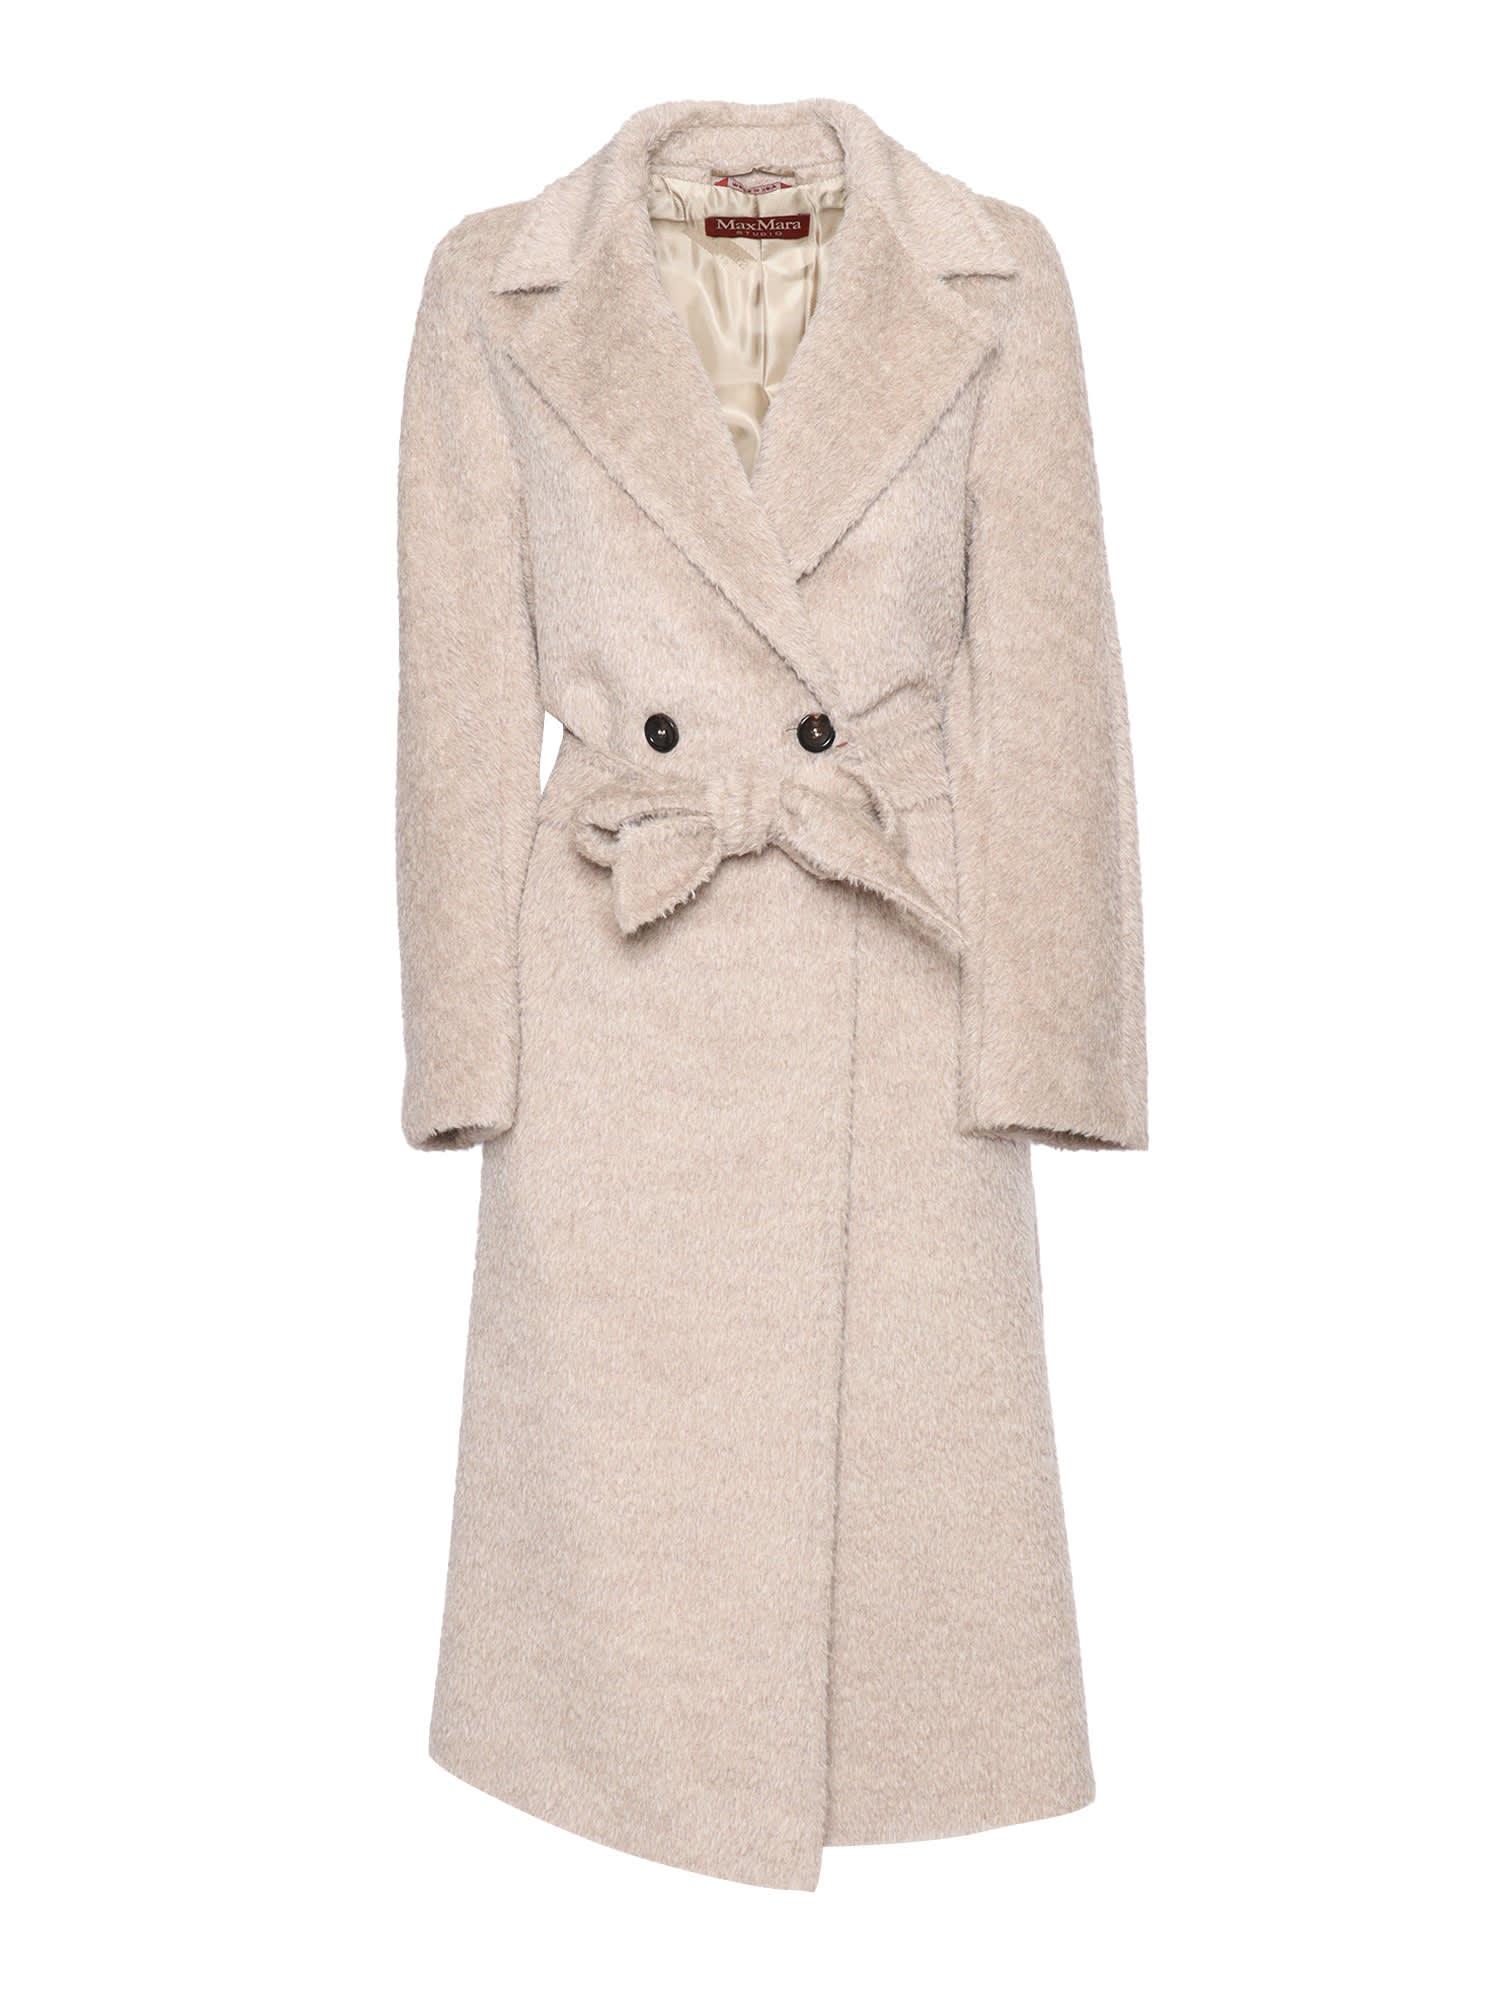 Max Mara Studio Double-breasted Coat in Natural | Lyst